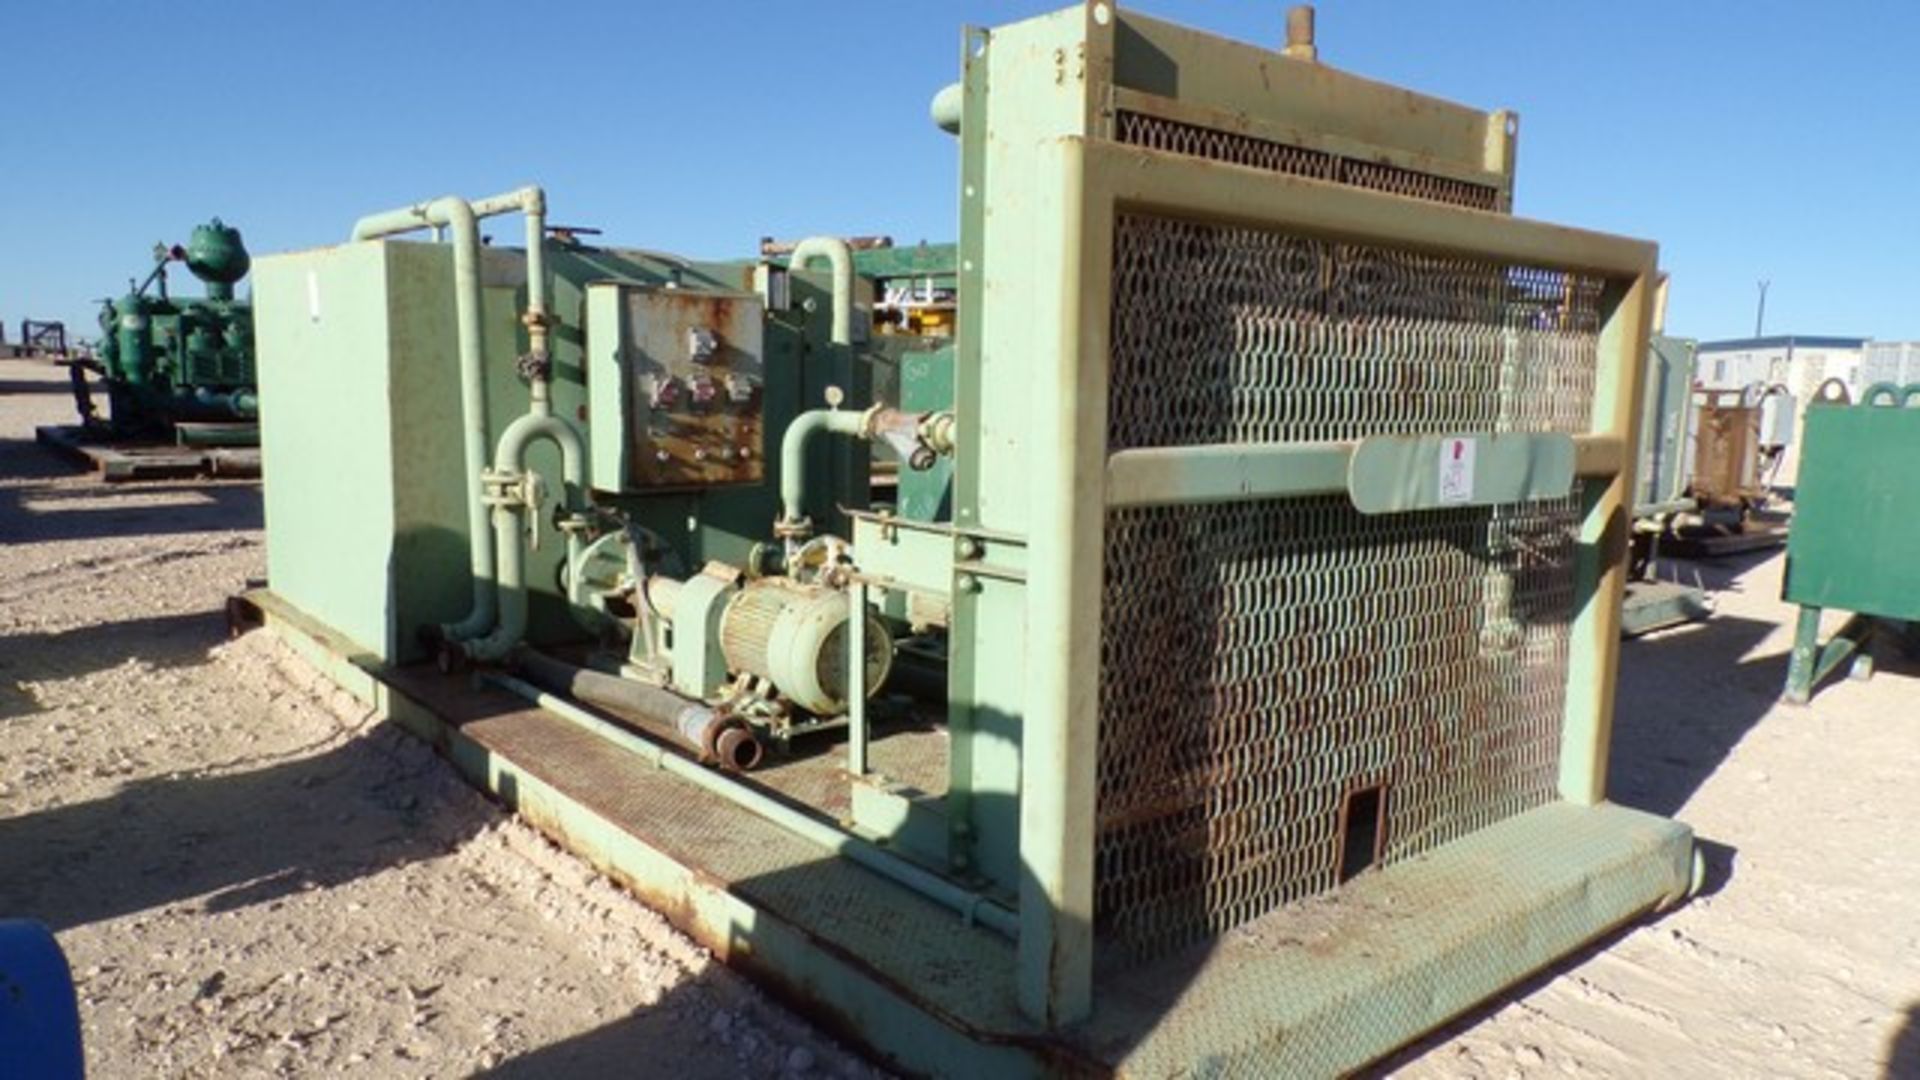 Located in YARD 1 - Midland, TX (2972) NATIONAL CLOSED LOOP BRAKE COOLING UNIT, RATING 15000' W/ 60"